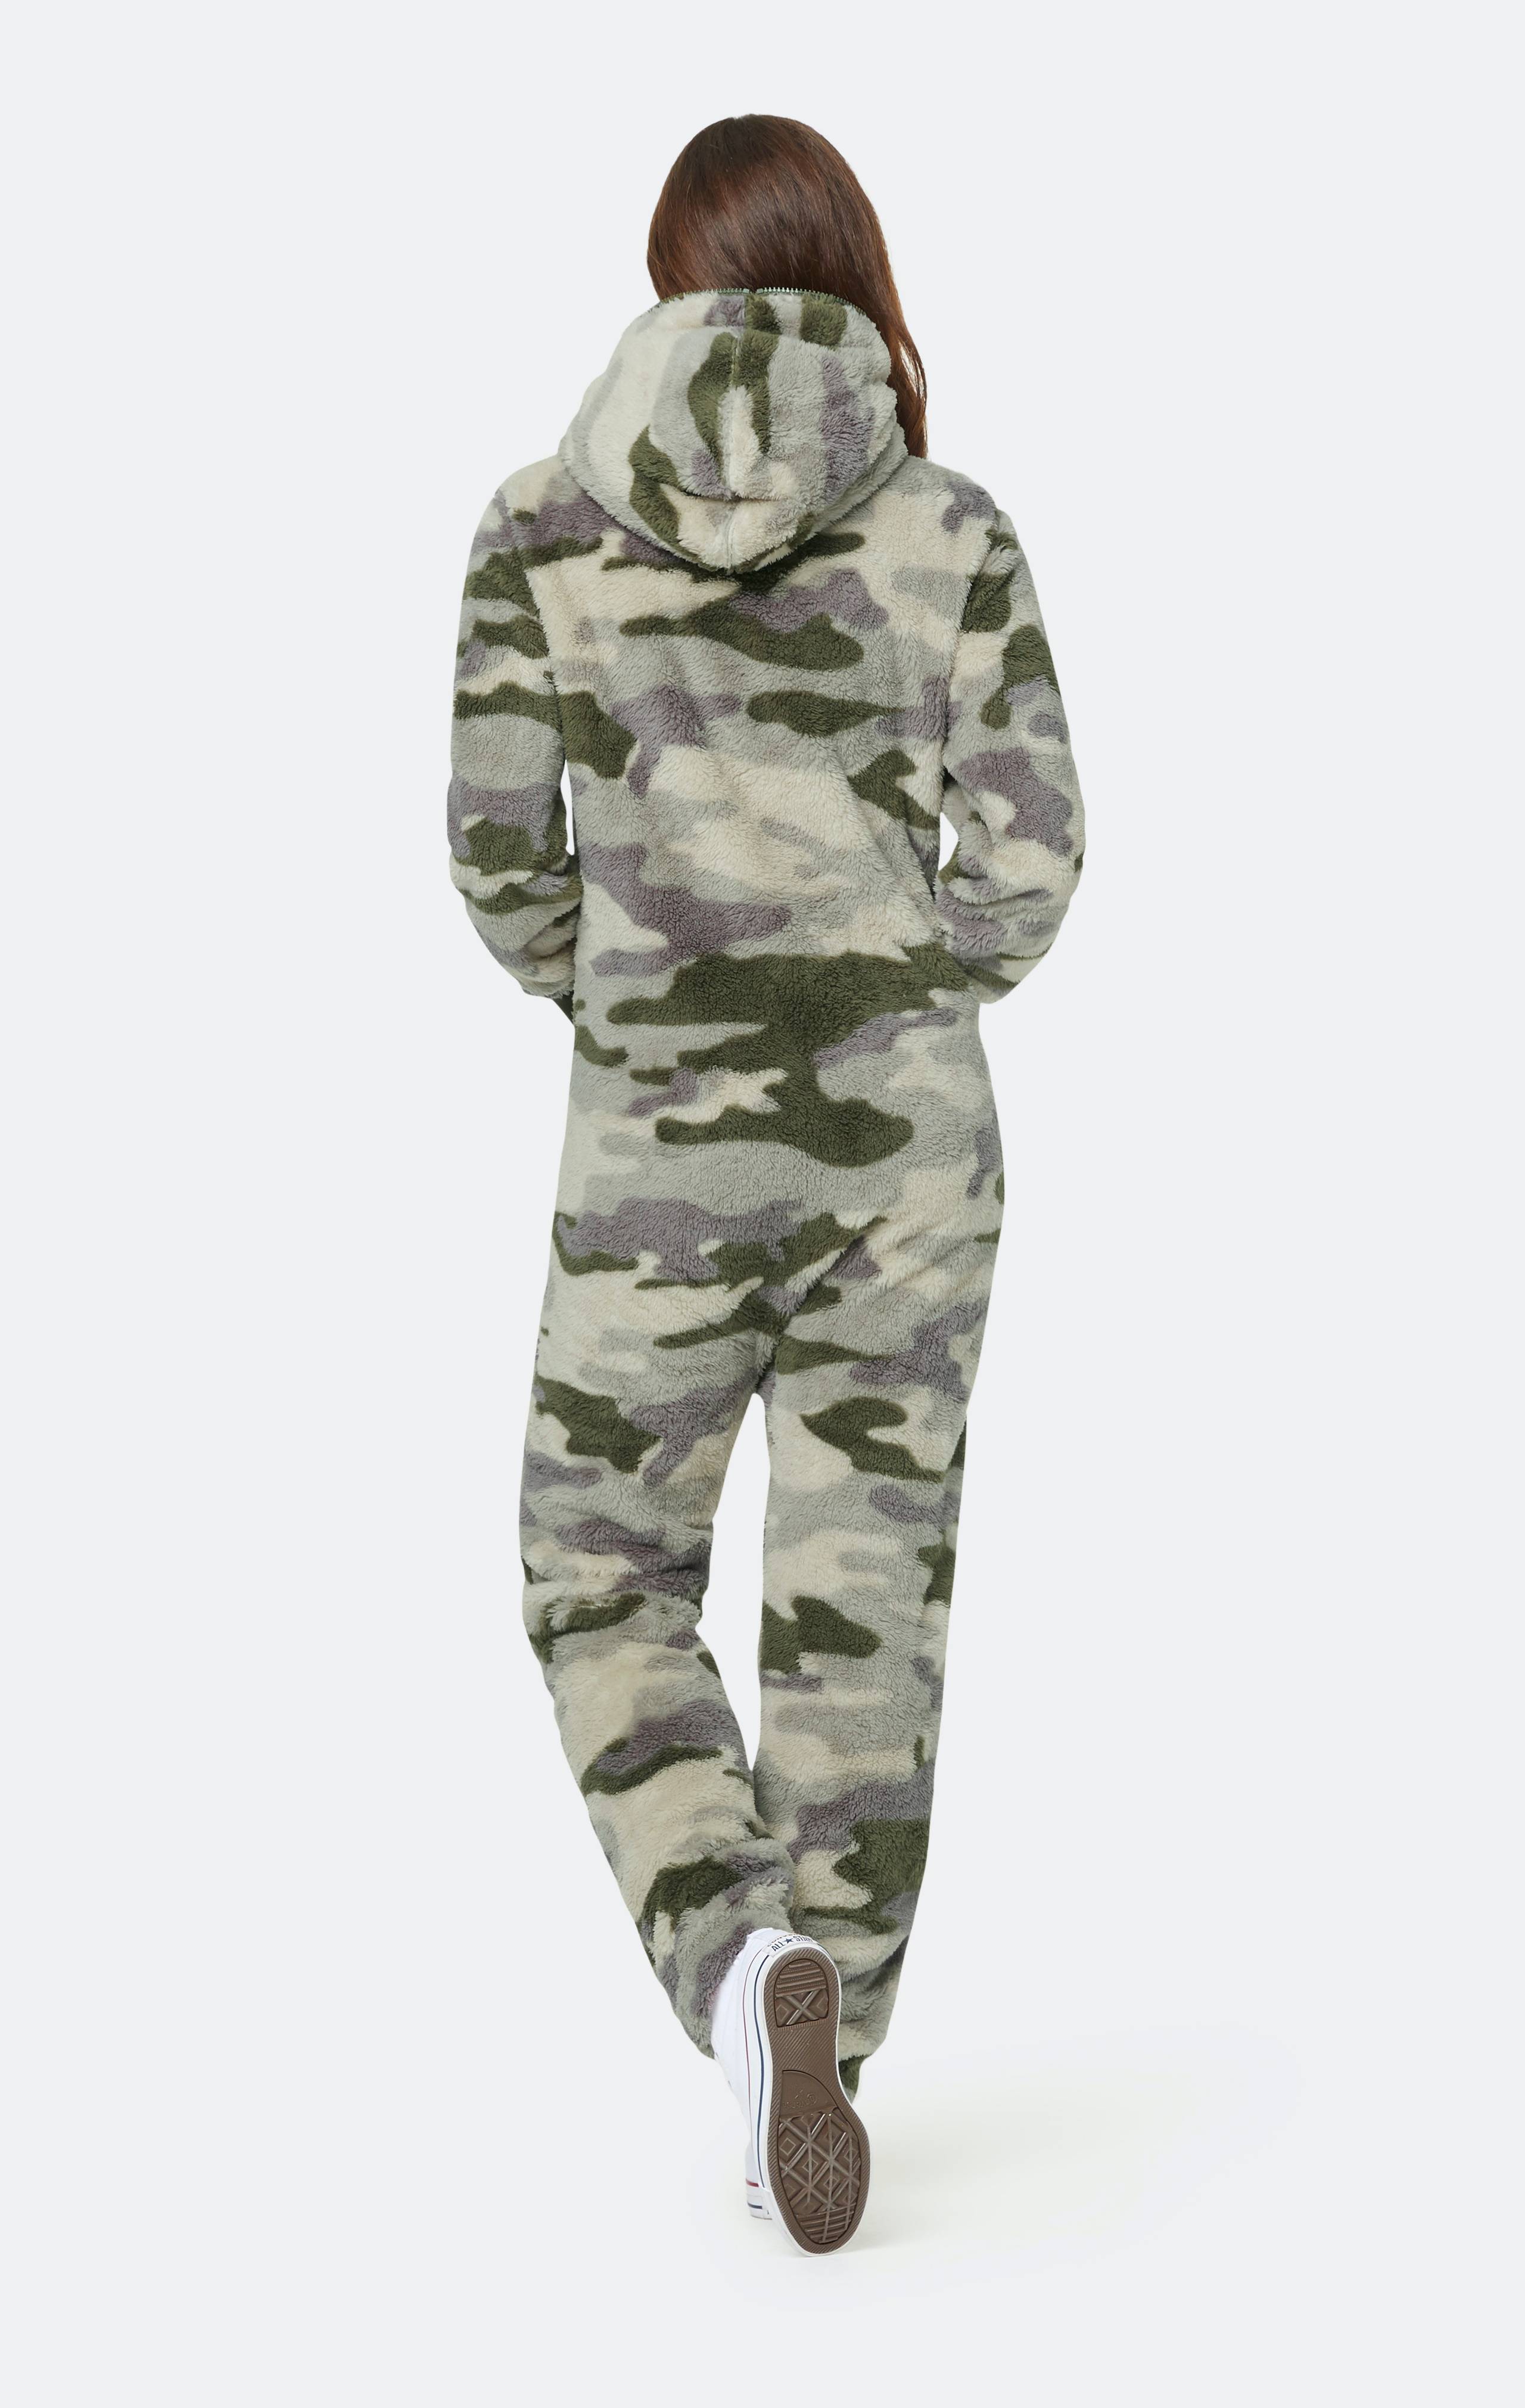 Onepiece The New Puppy Jumpsuit Army Camo - 7